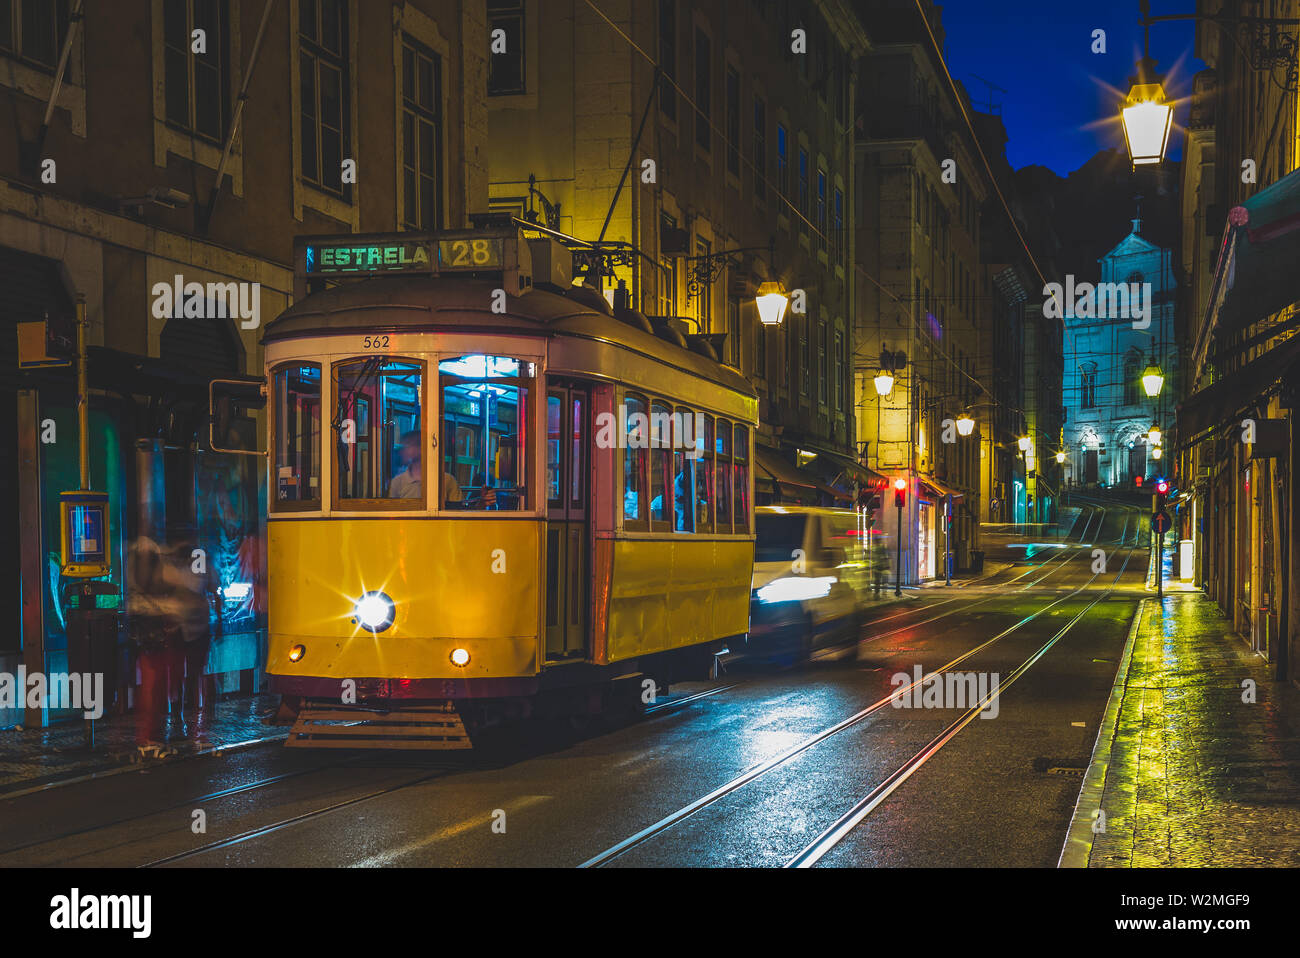 tram on line 28 in lisbon, portugal at night Stock Photo